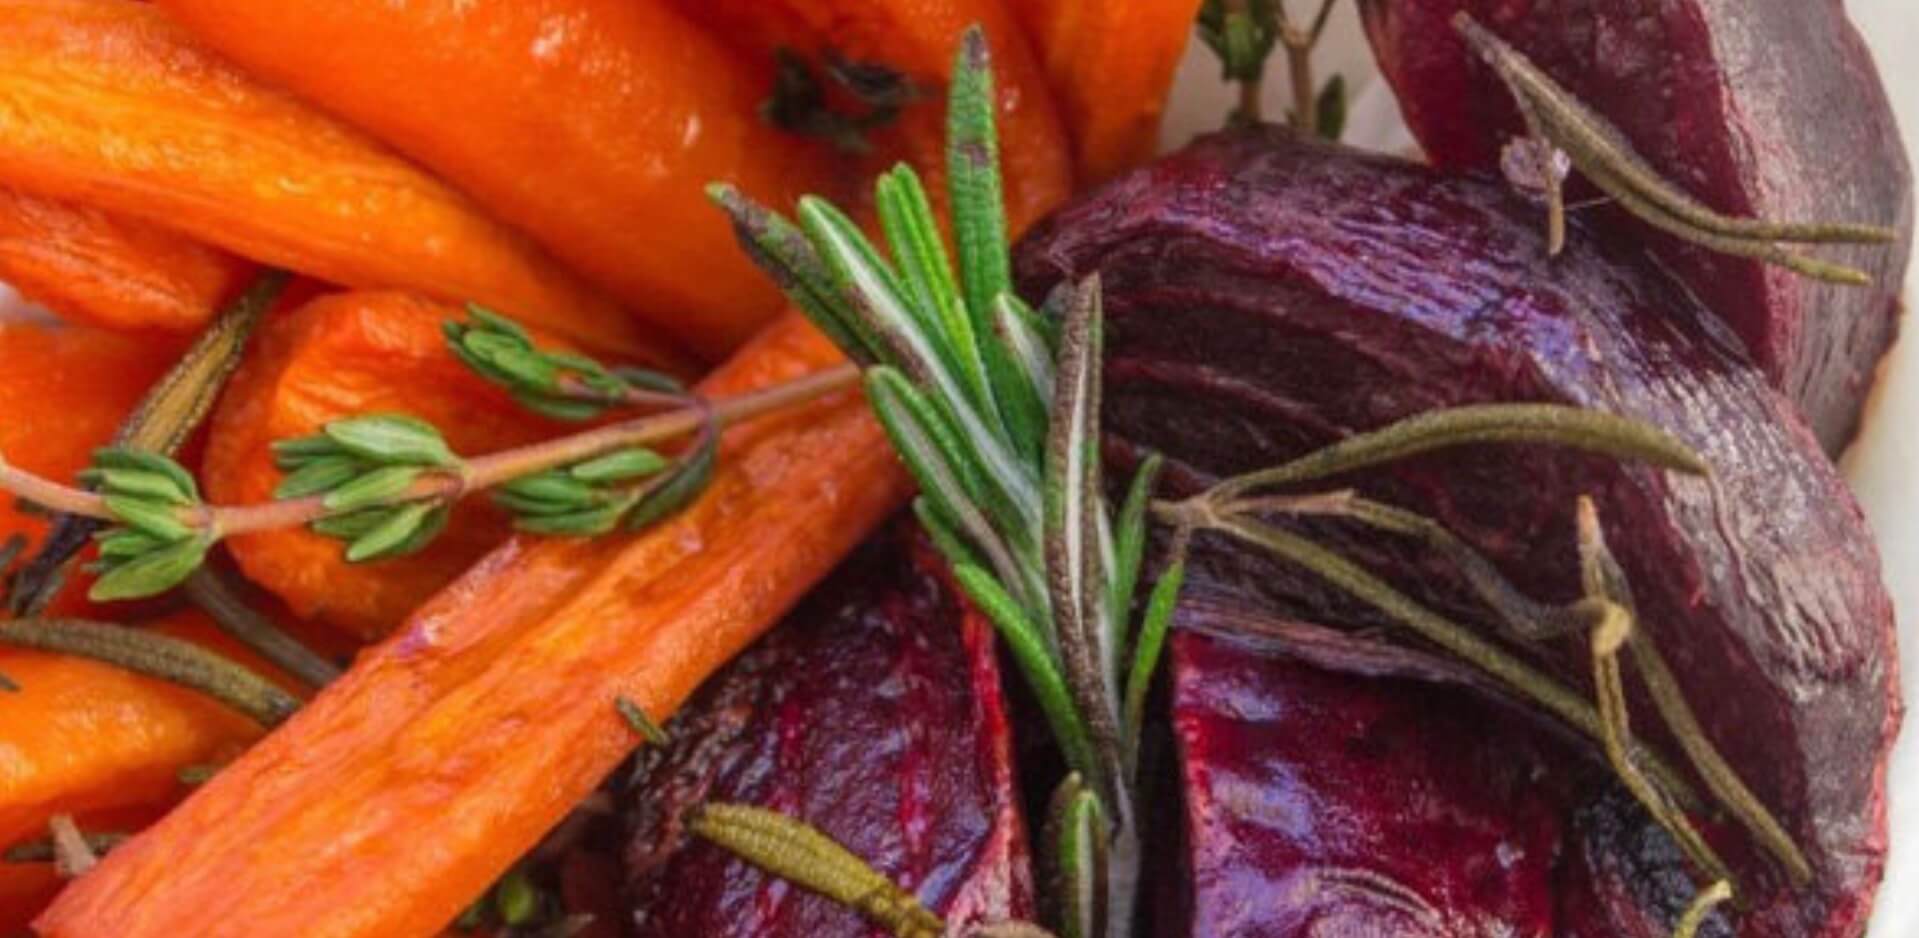 Roasted Beets & Carrots with Rosemary Garlic Butter